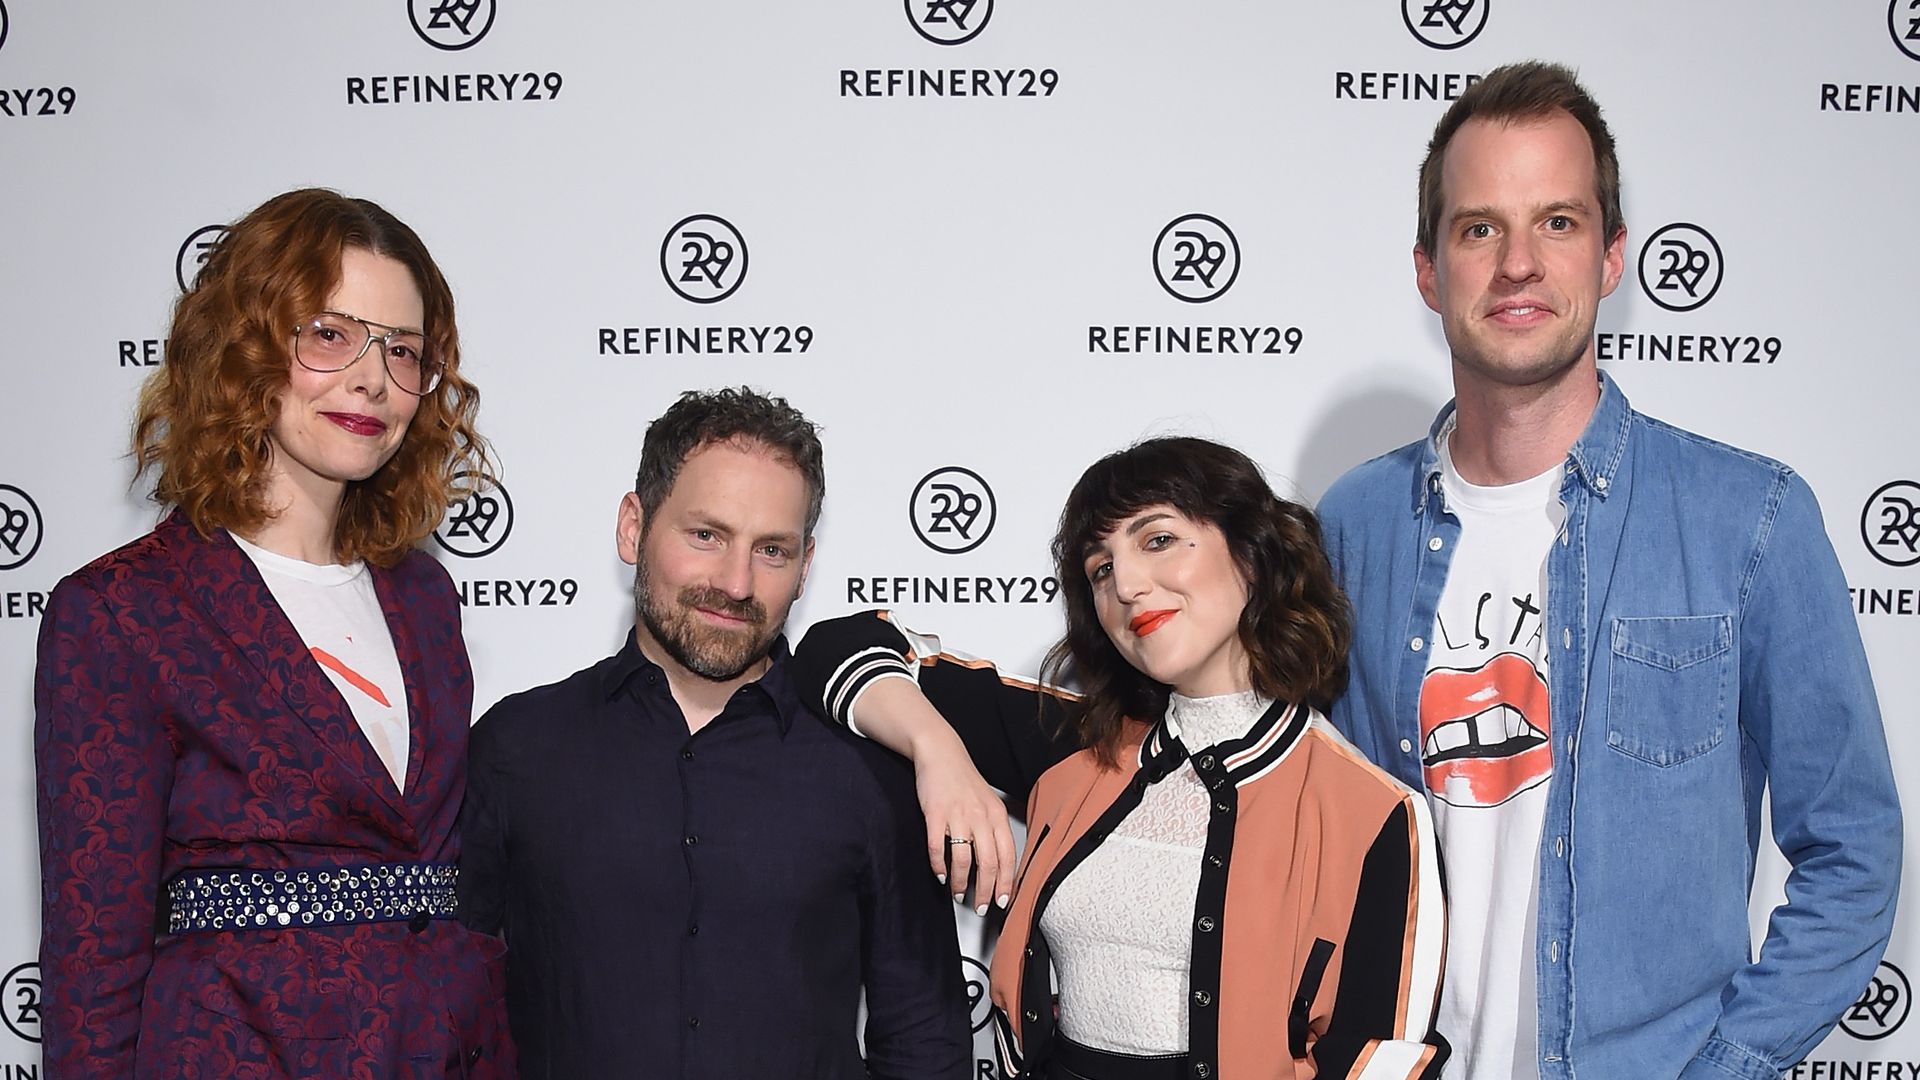 The founders of Refinery29